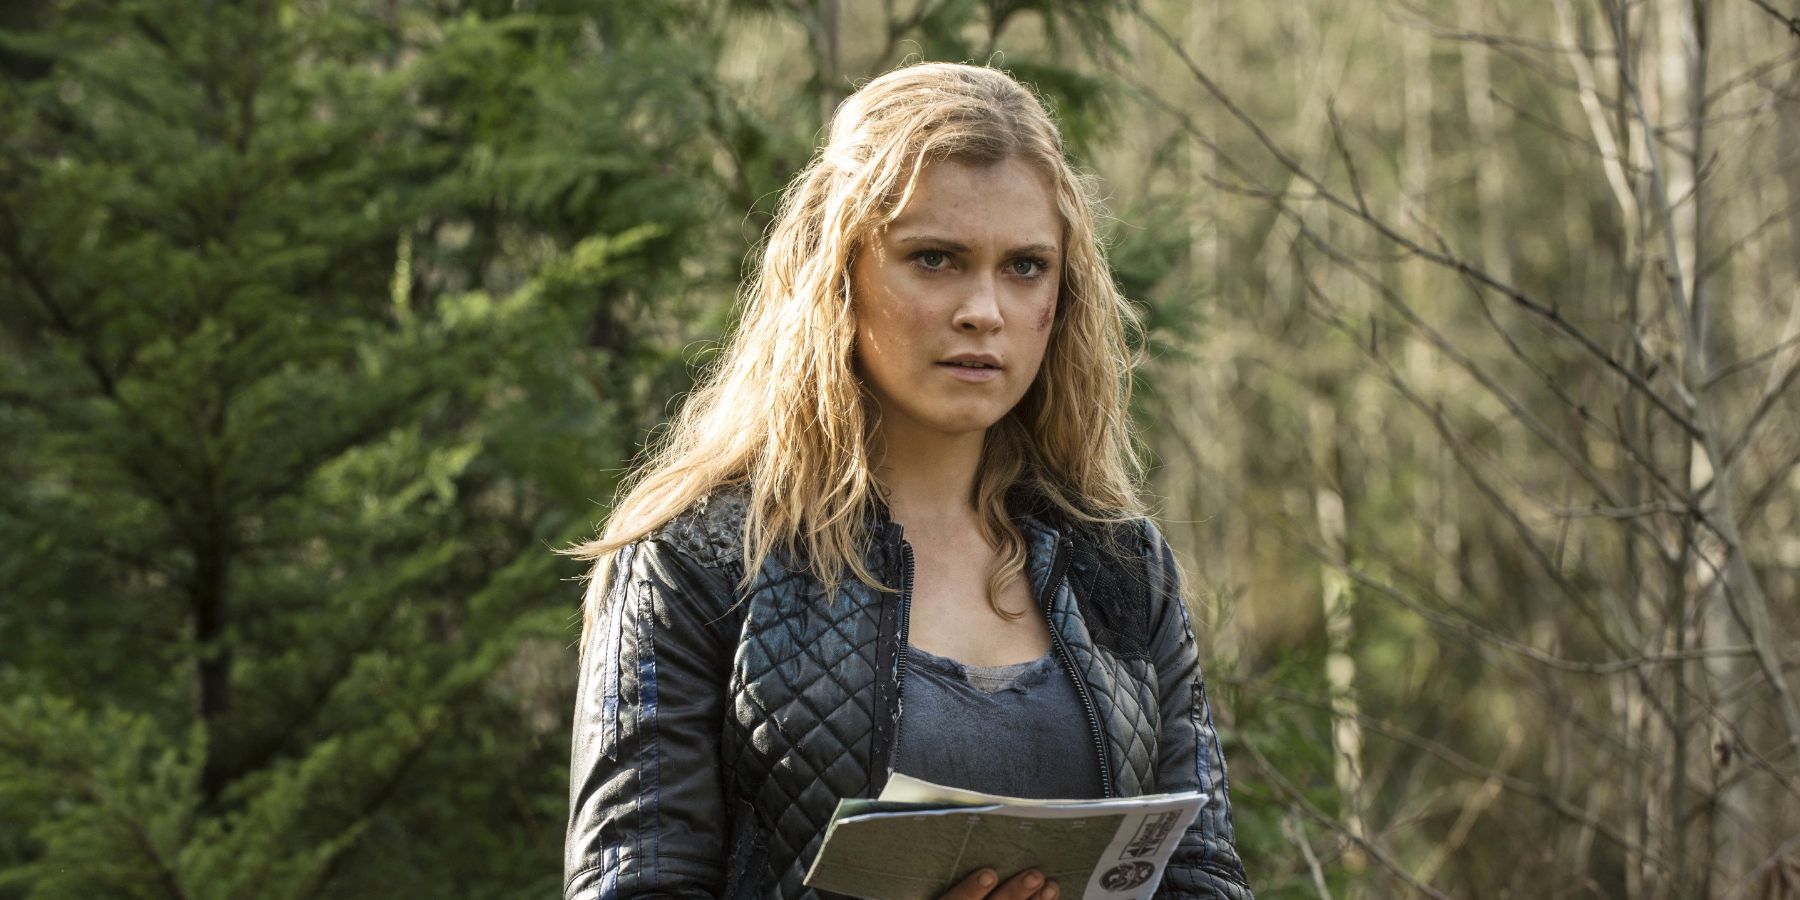 Clarke stands in the forest in The 100 season 2